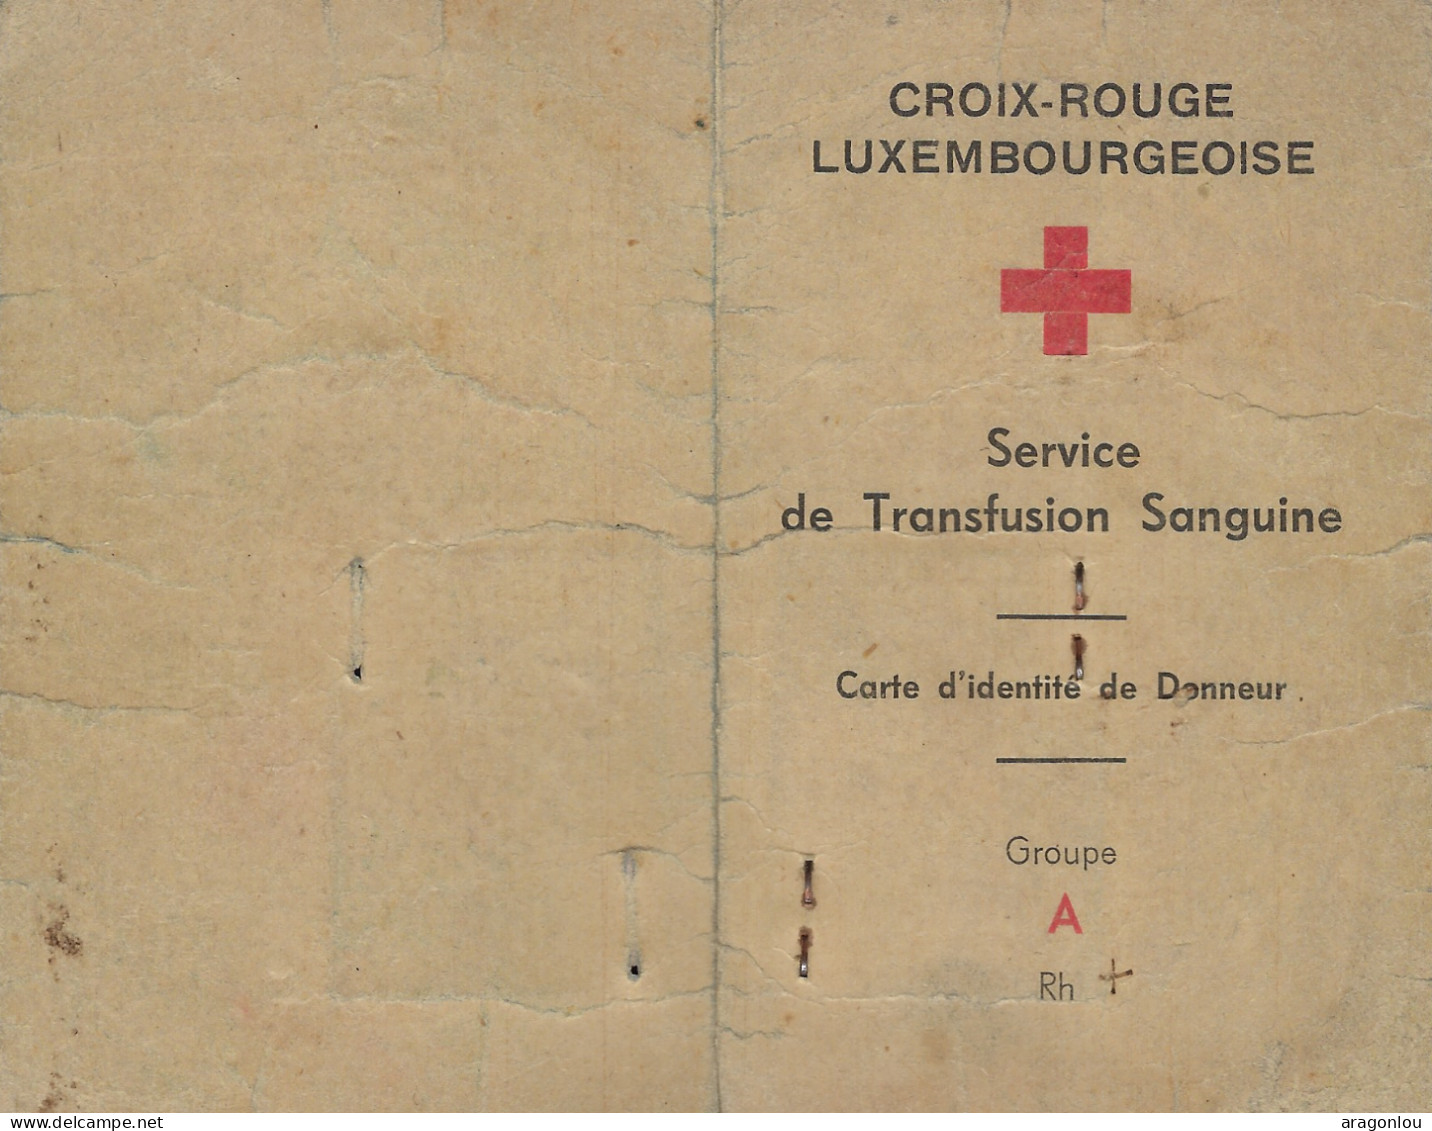 Luxembourg - Luxemburg - SERVICE DE TRANSFUSION SANGUINE  -  CROIX ROUGE , LUXEMBOURGEOISE - Historical Documents